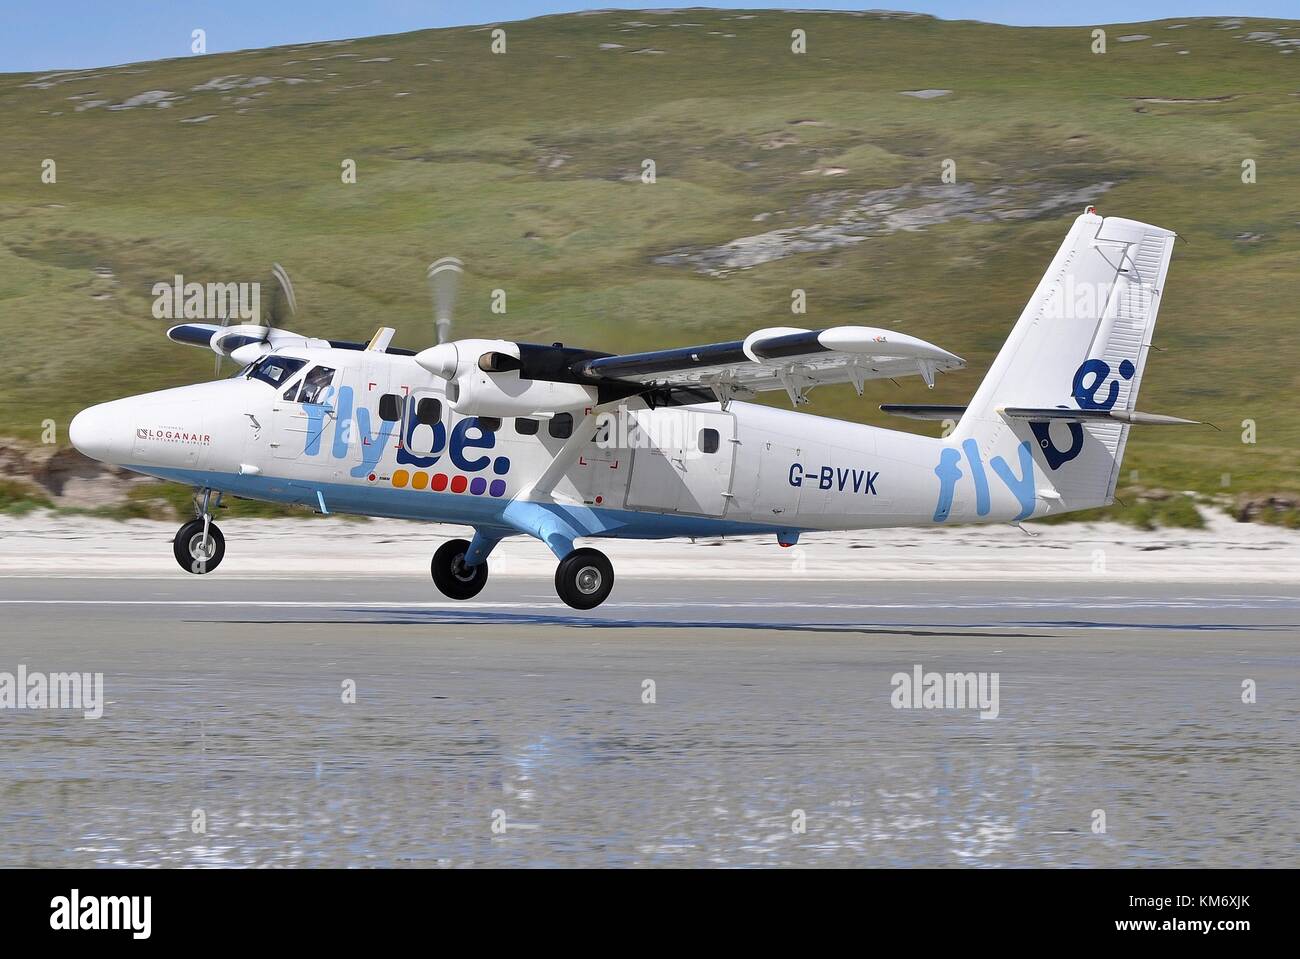 BEACH RUNWAY ON THE ISLAND OF BARRA, OUTER HEBRIDES. G-BVVK DHC-6-300 TWIN OTTER OF LOGANAIR OPERATED ON BEHALF OF FLYBE. SCHED SERVICE FROM GLASGOW. Stock Photo